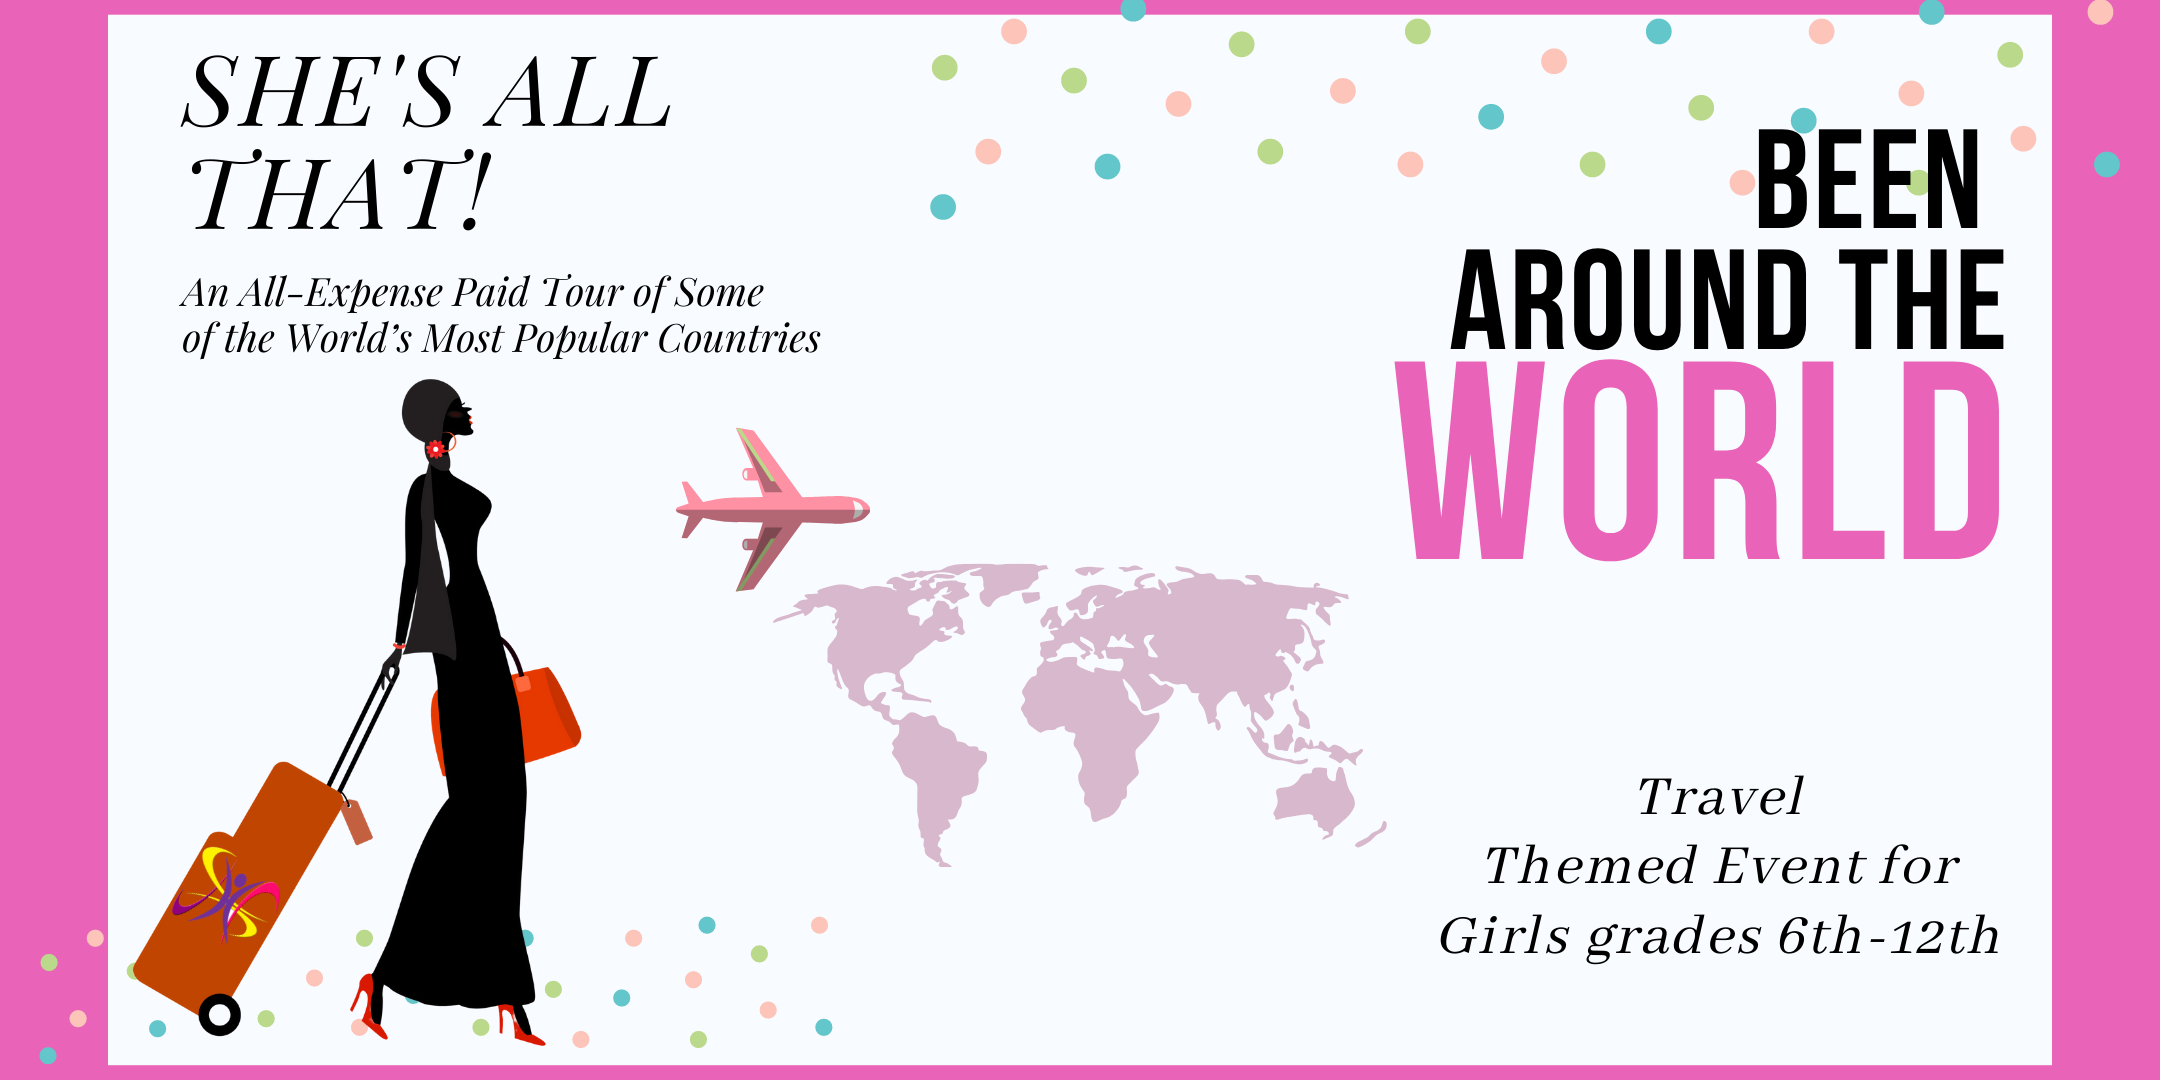 Been Around the World: Travel Themed Event for Girls in 6th-12th Grade.